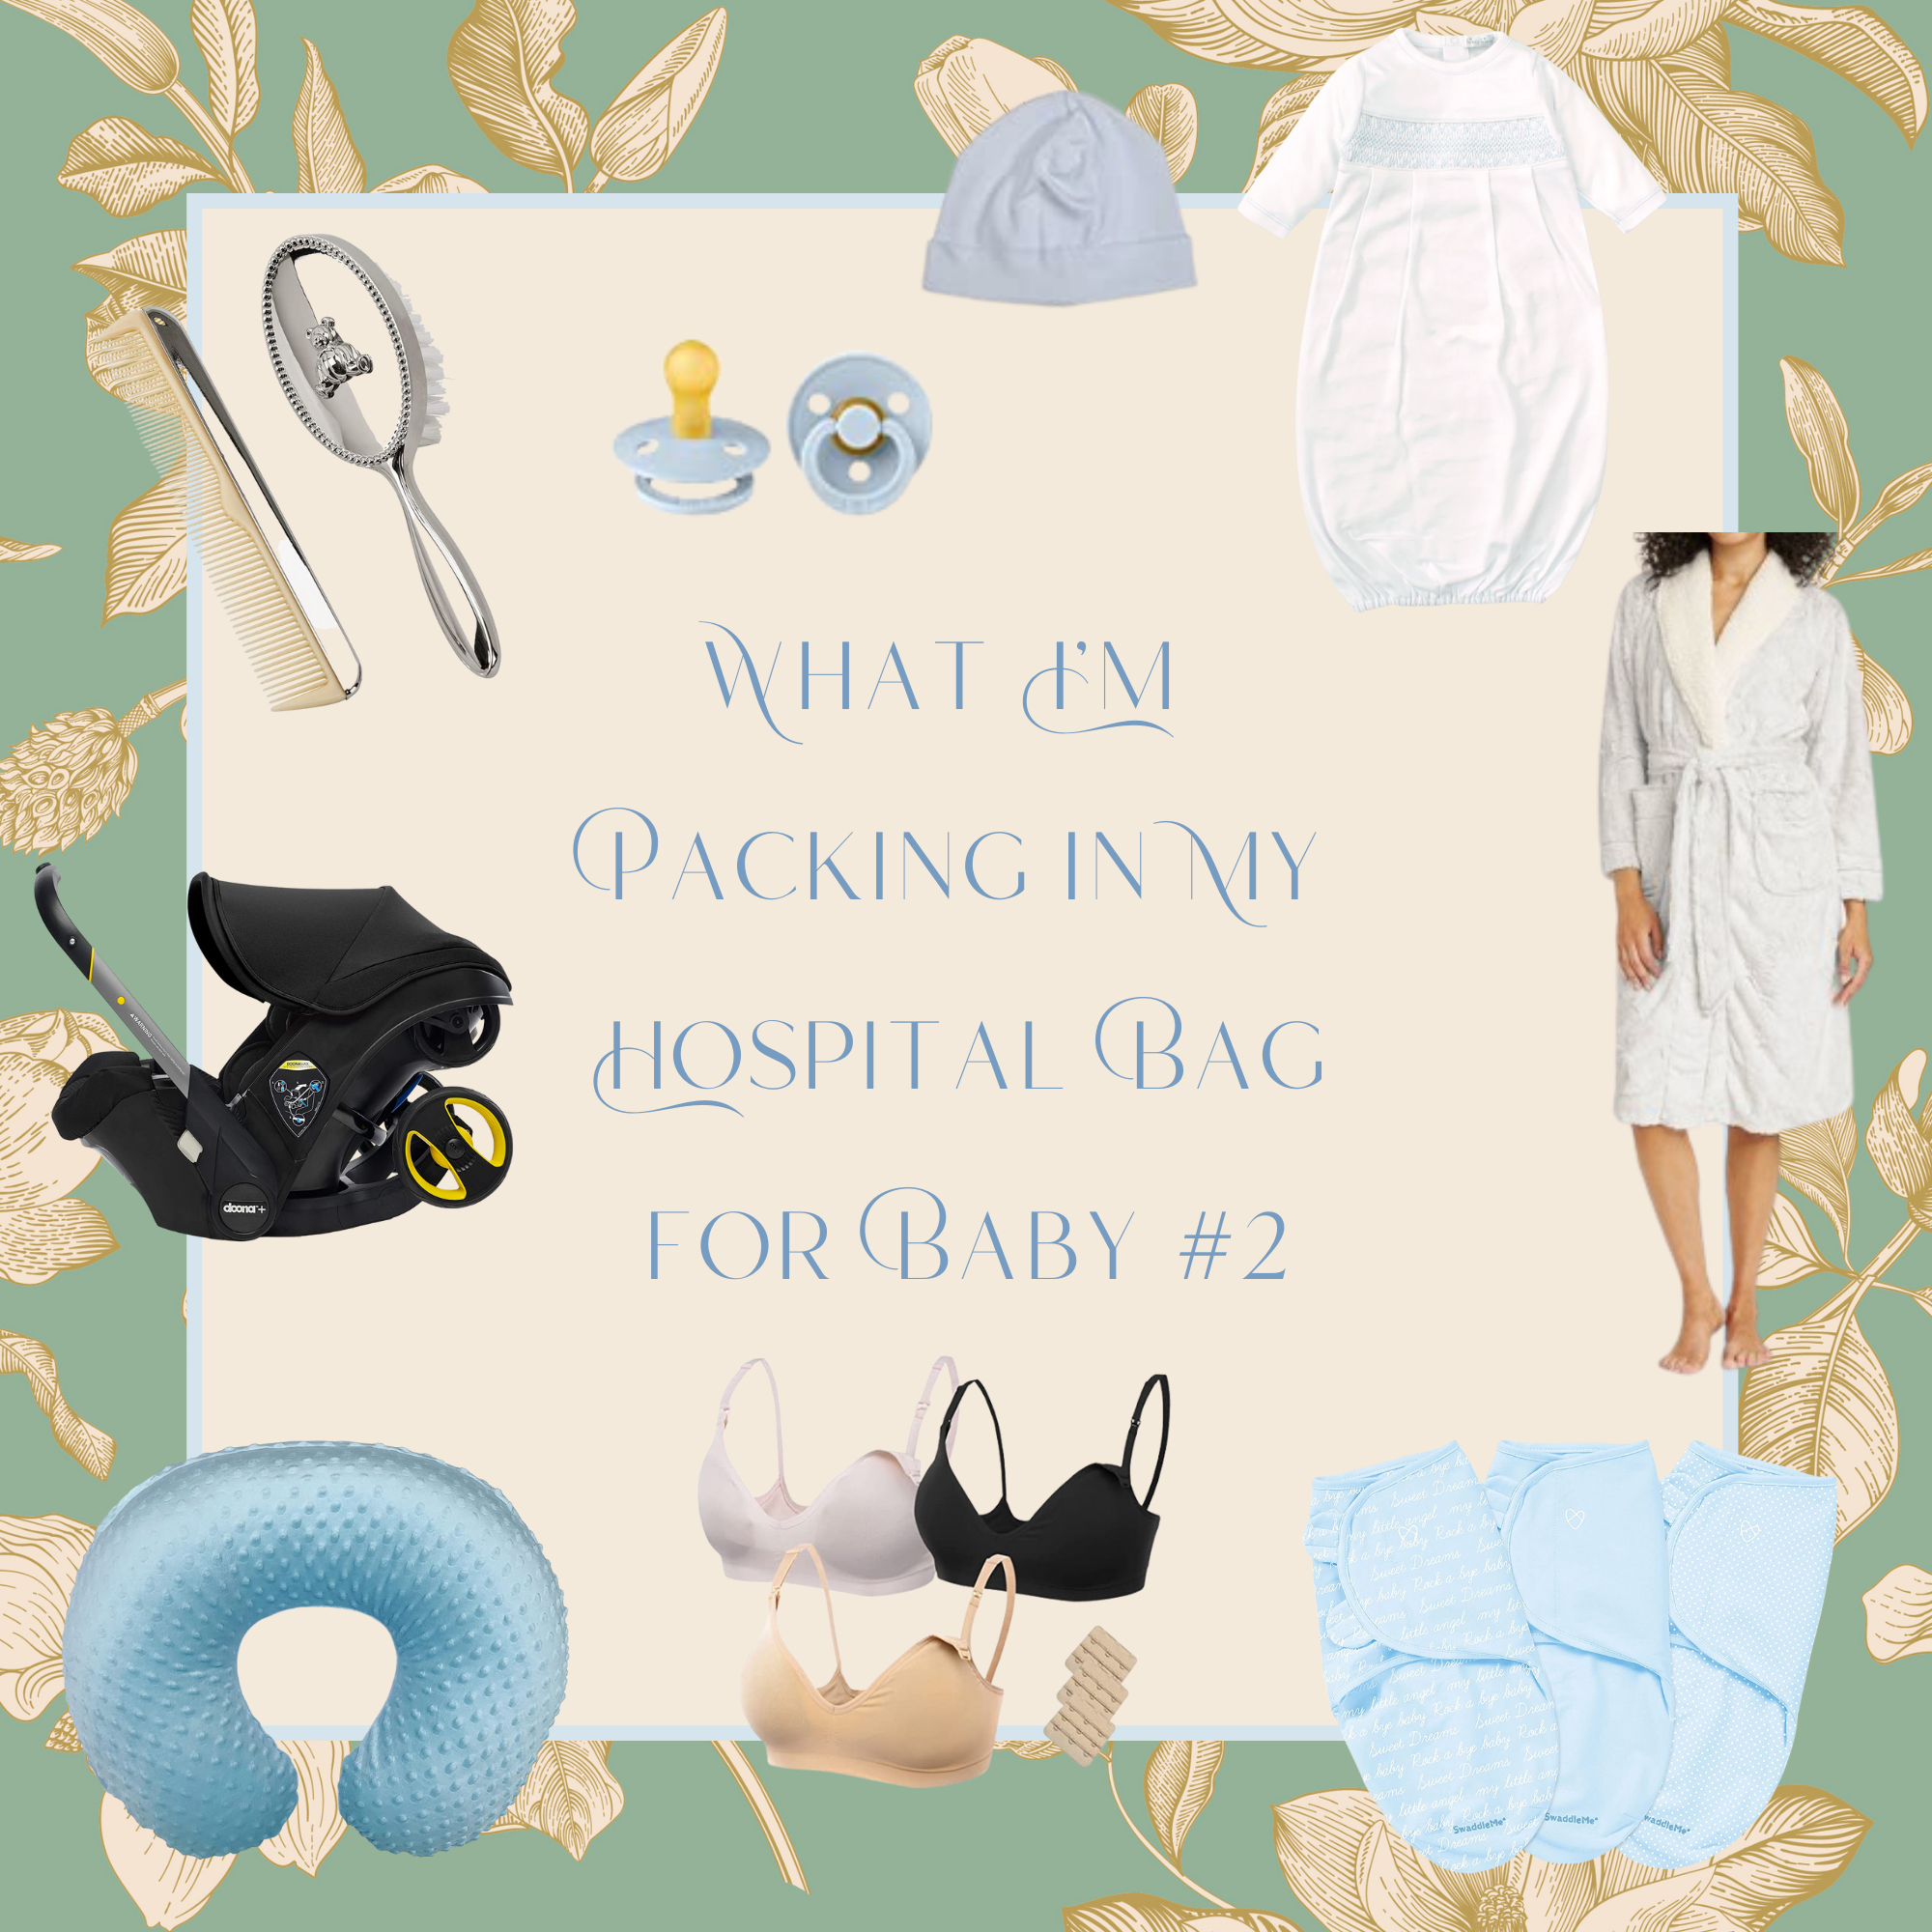 What to Pack in Your Hospital Bag - Everything I'm Packing to